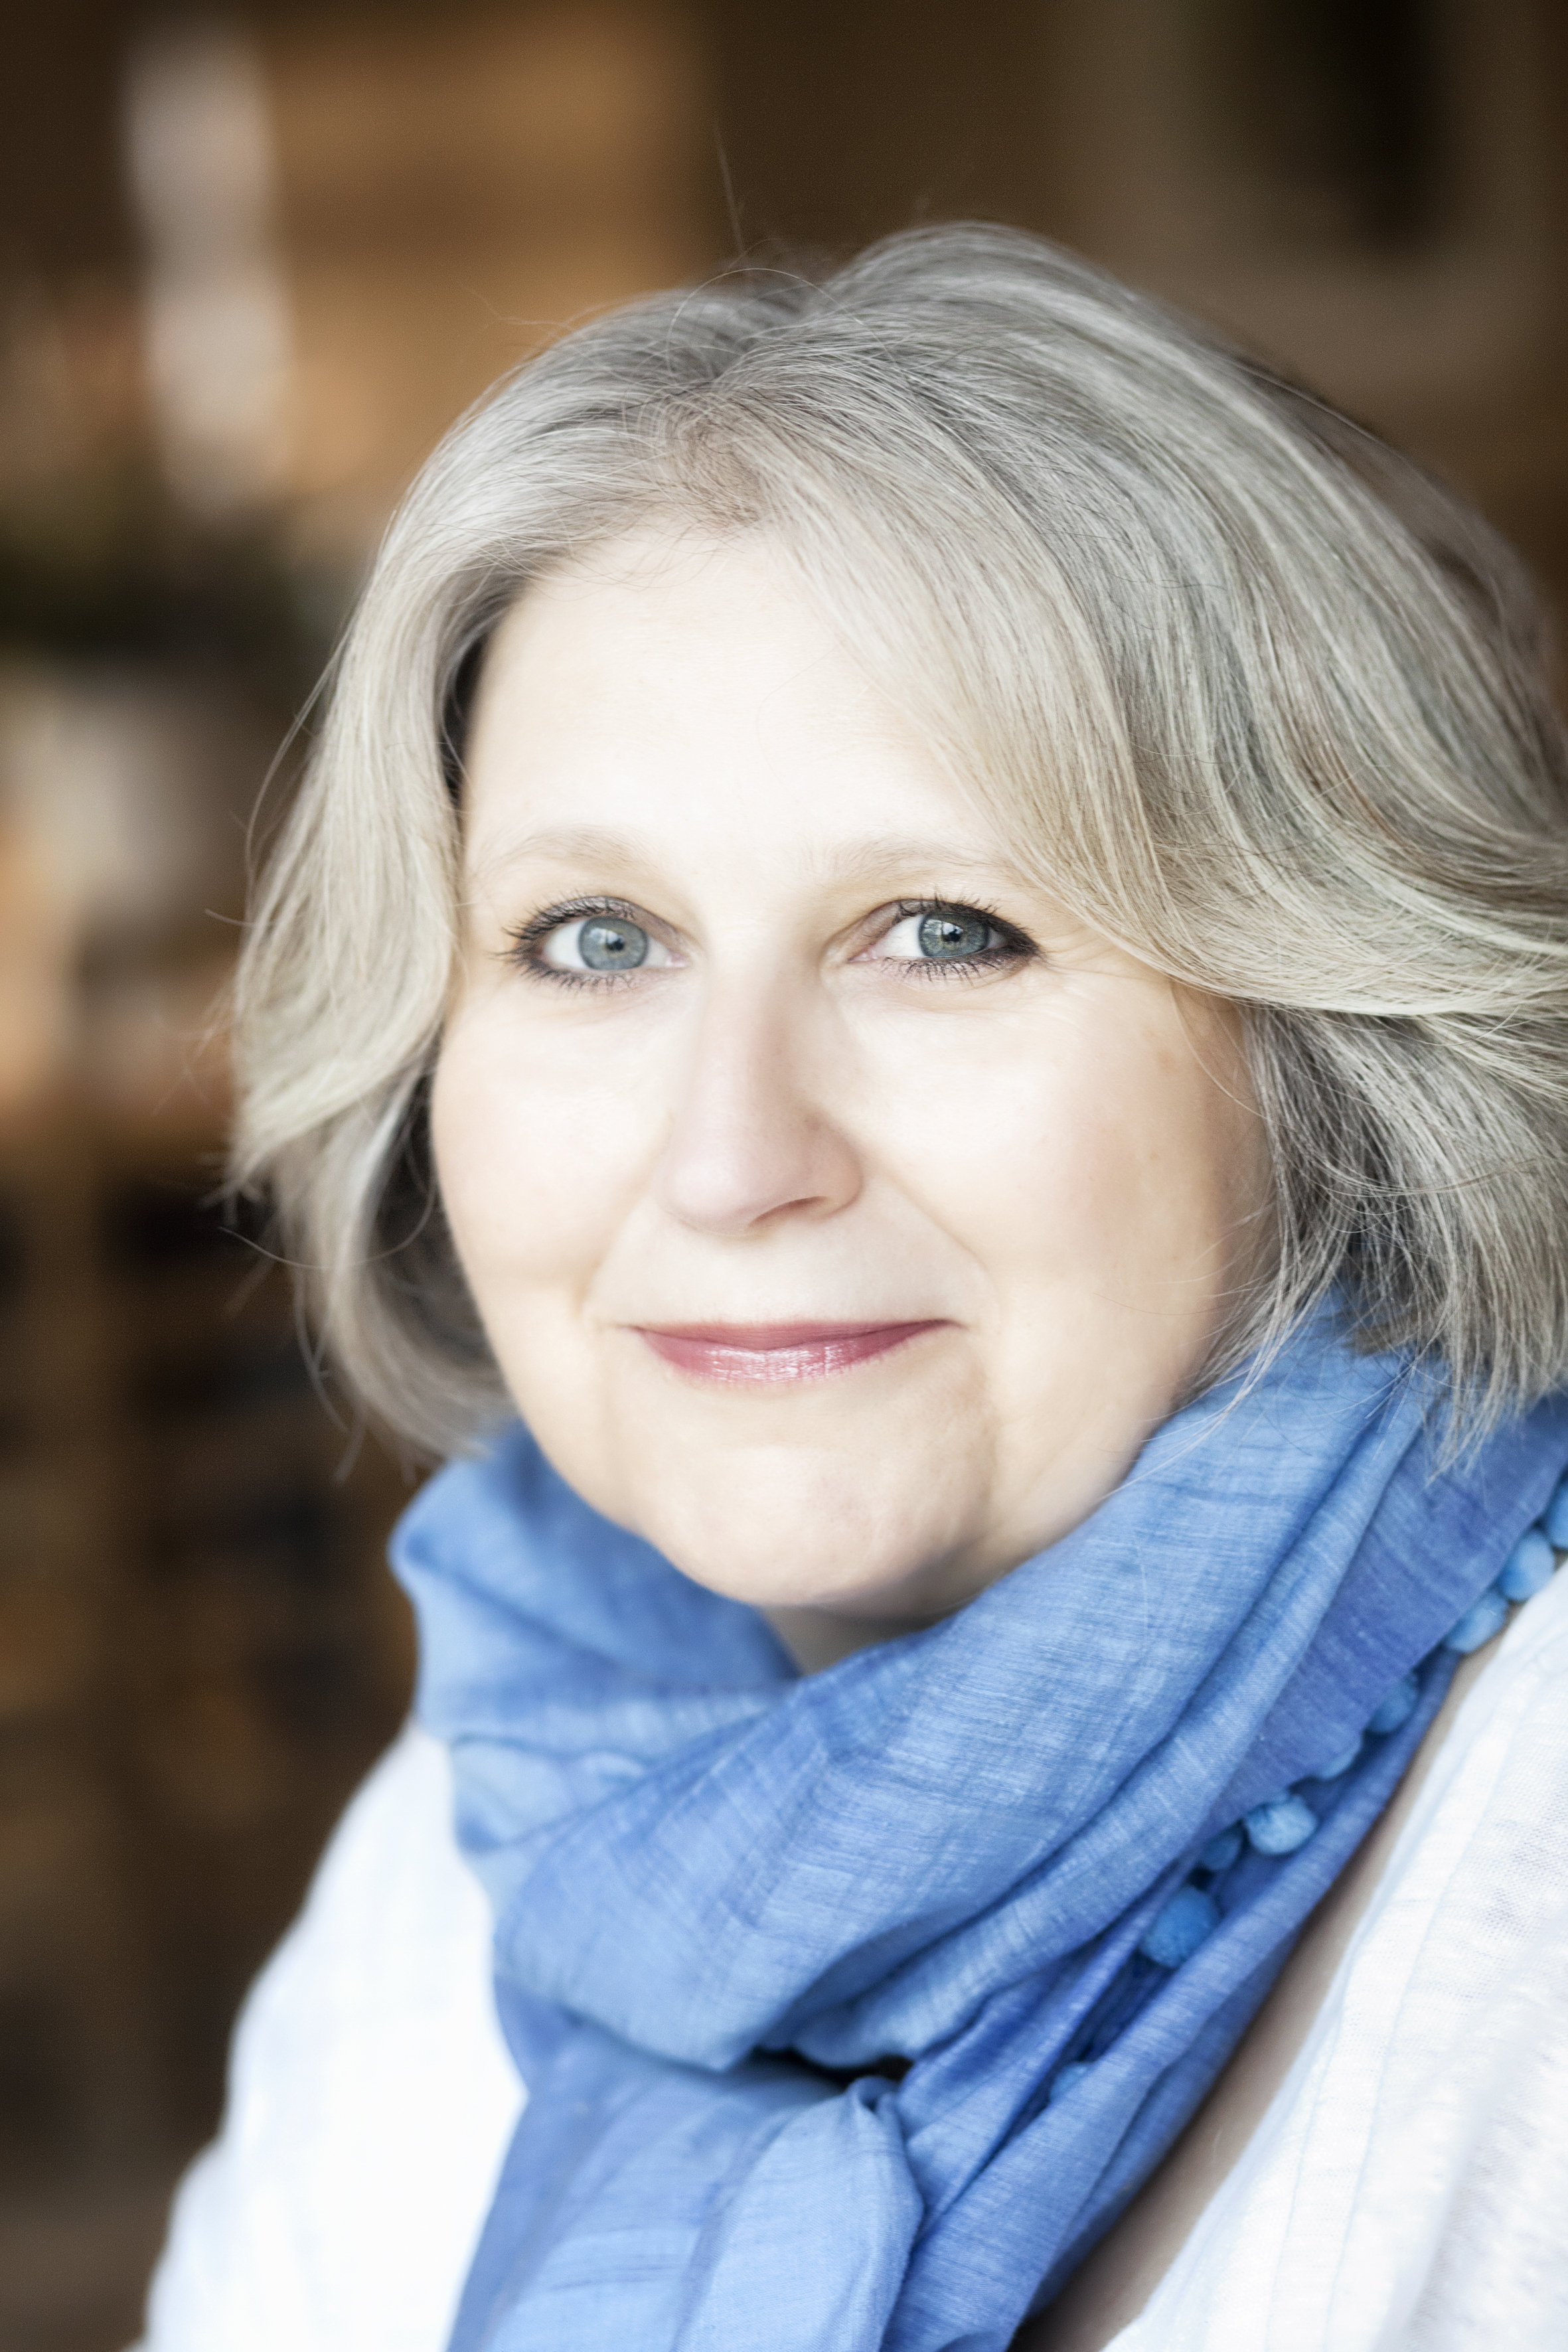 A headshot photo of a white middle-aged woman with short grey hair wearing a blue scarf and white shirt.